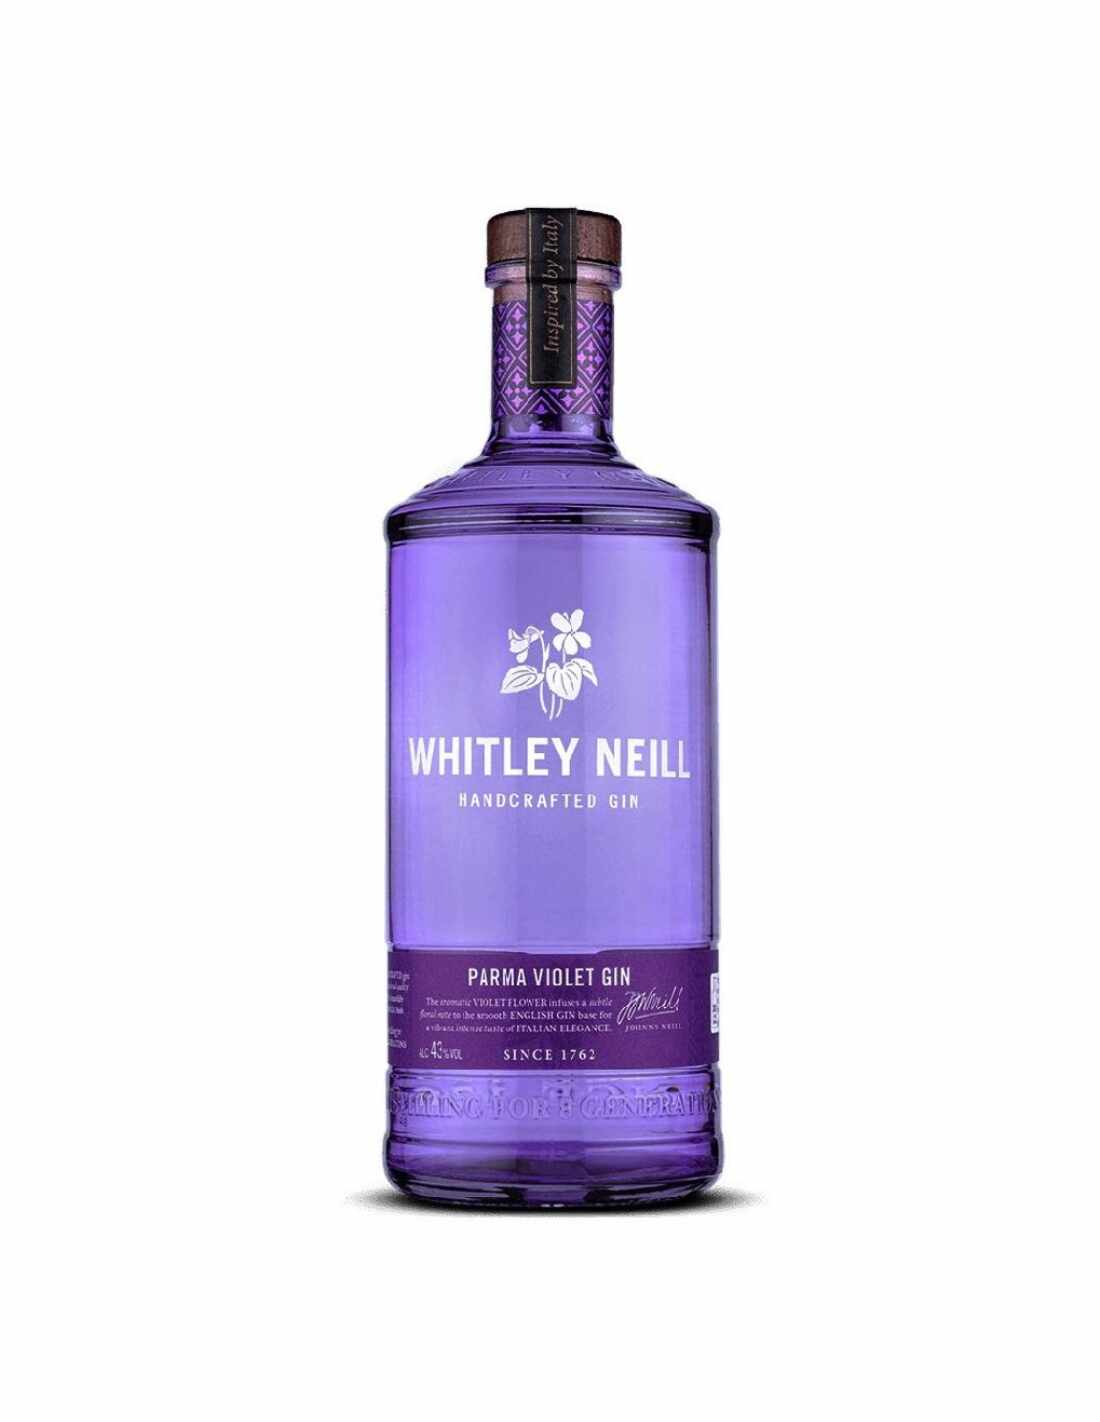 Gin Whitley Neill Parma Violet, 43% alc., 0.7L, Anglia